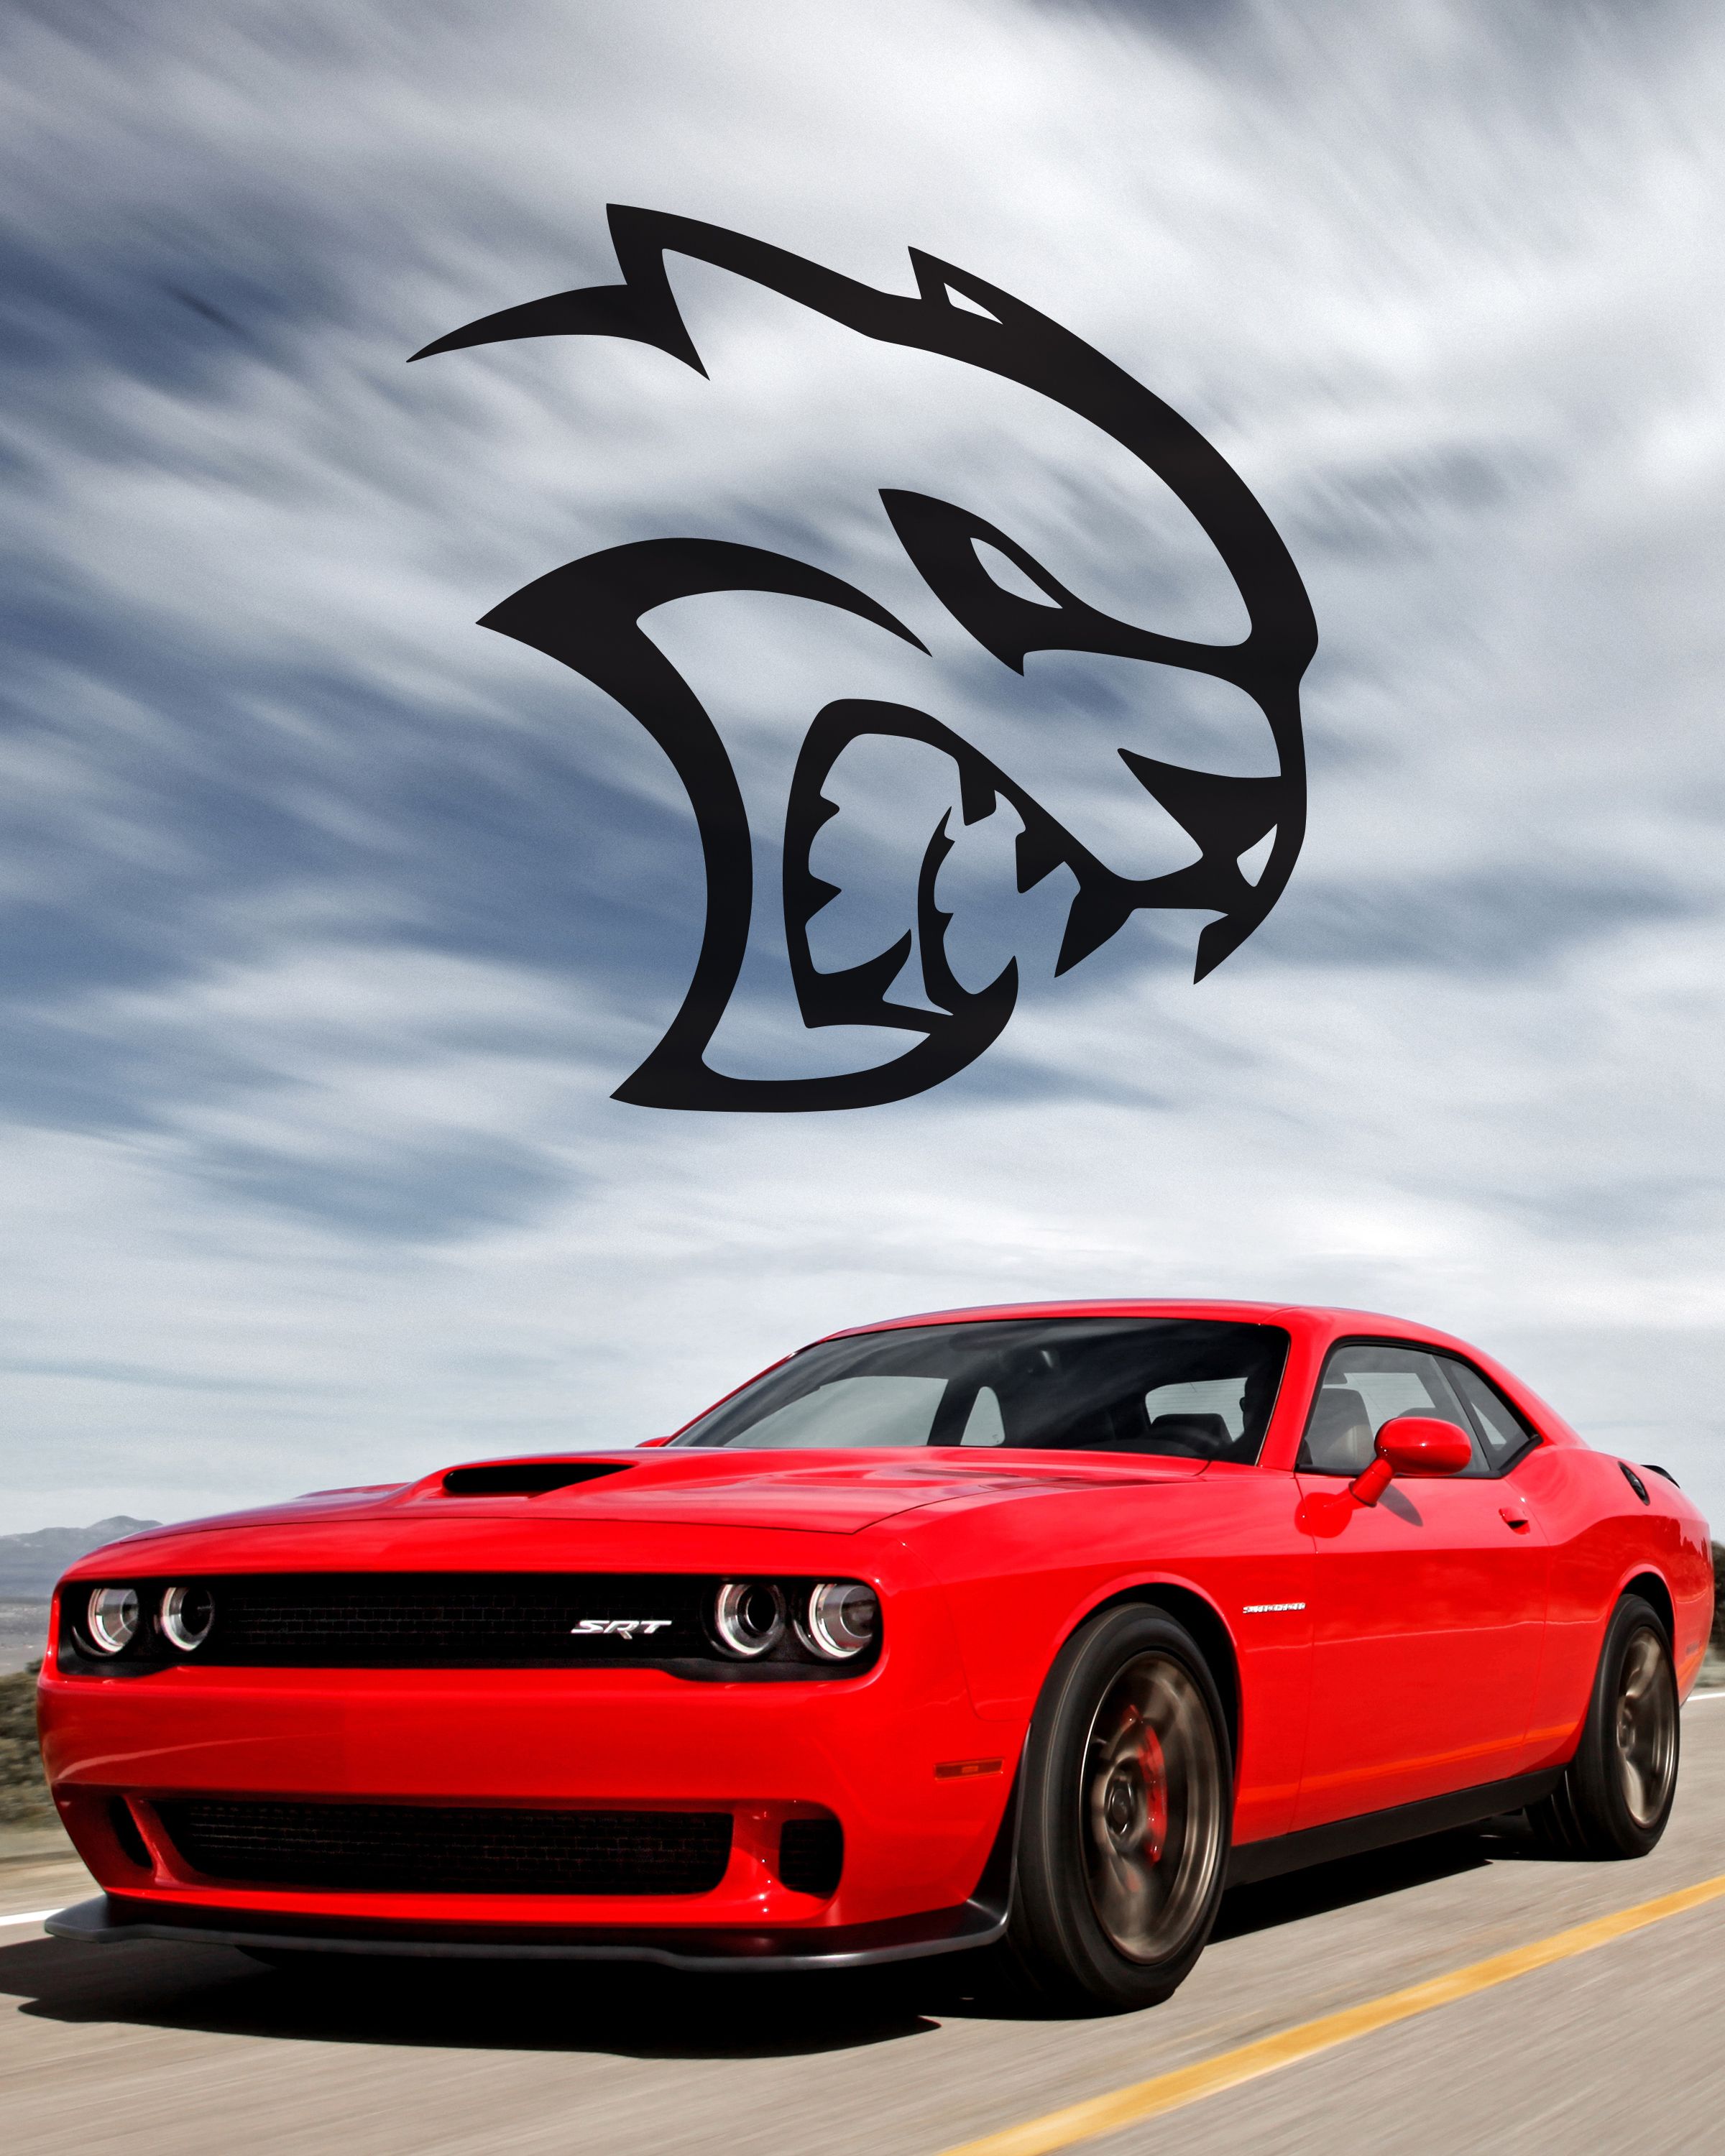 Free download Hellcat engine ringtone and wallpaper Cool American